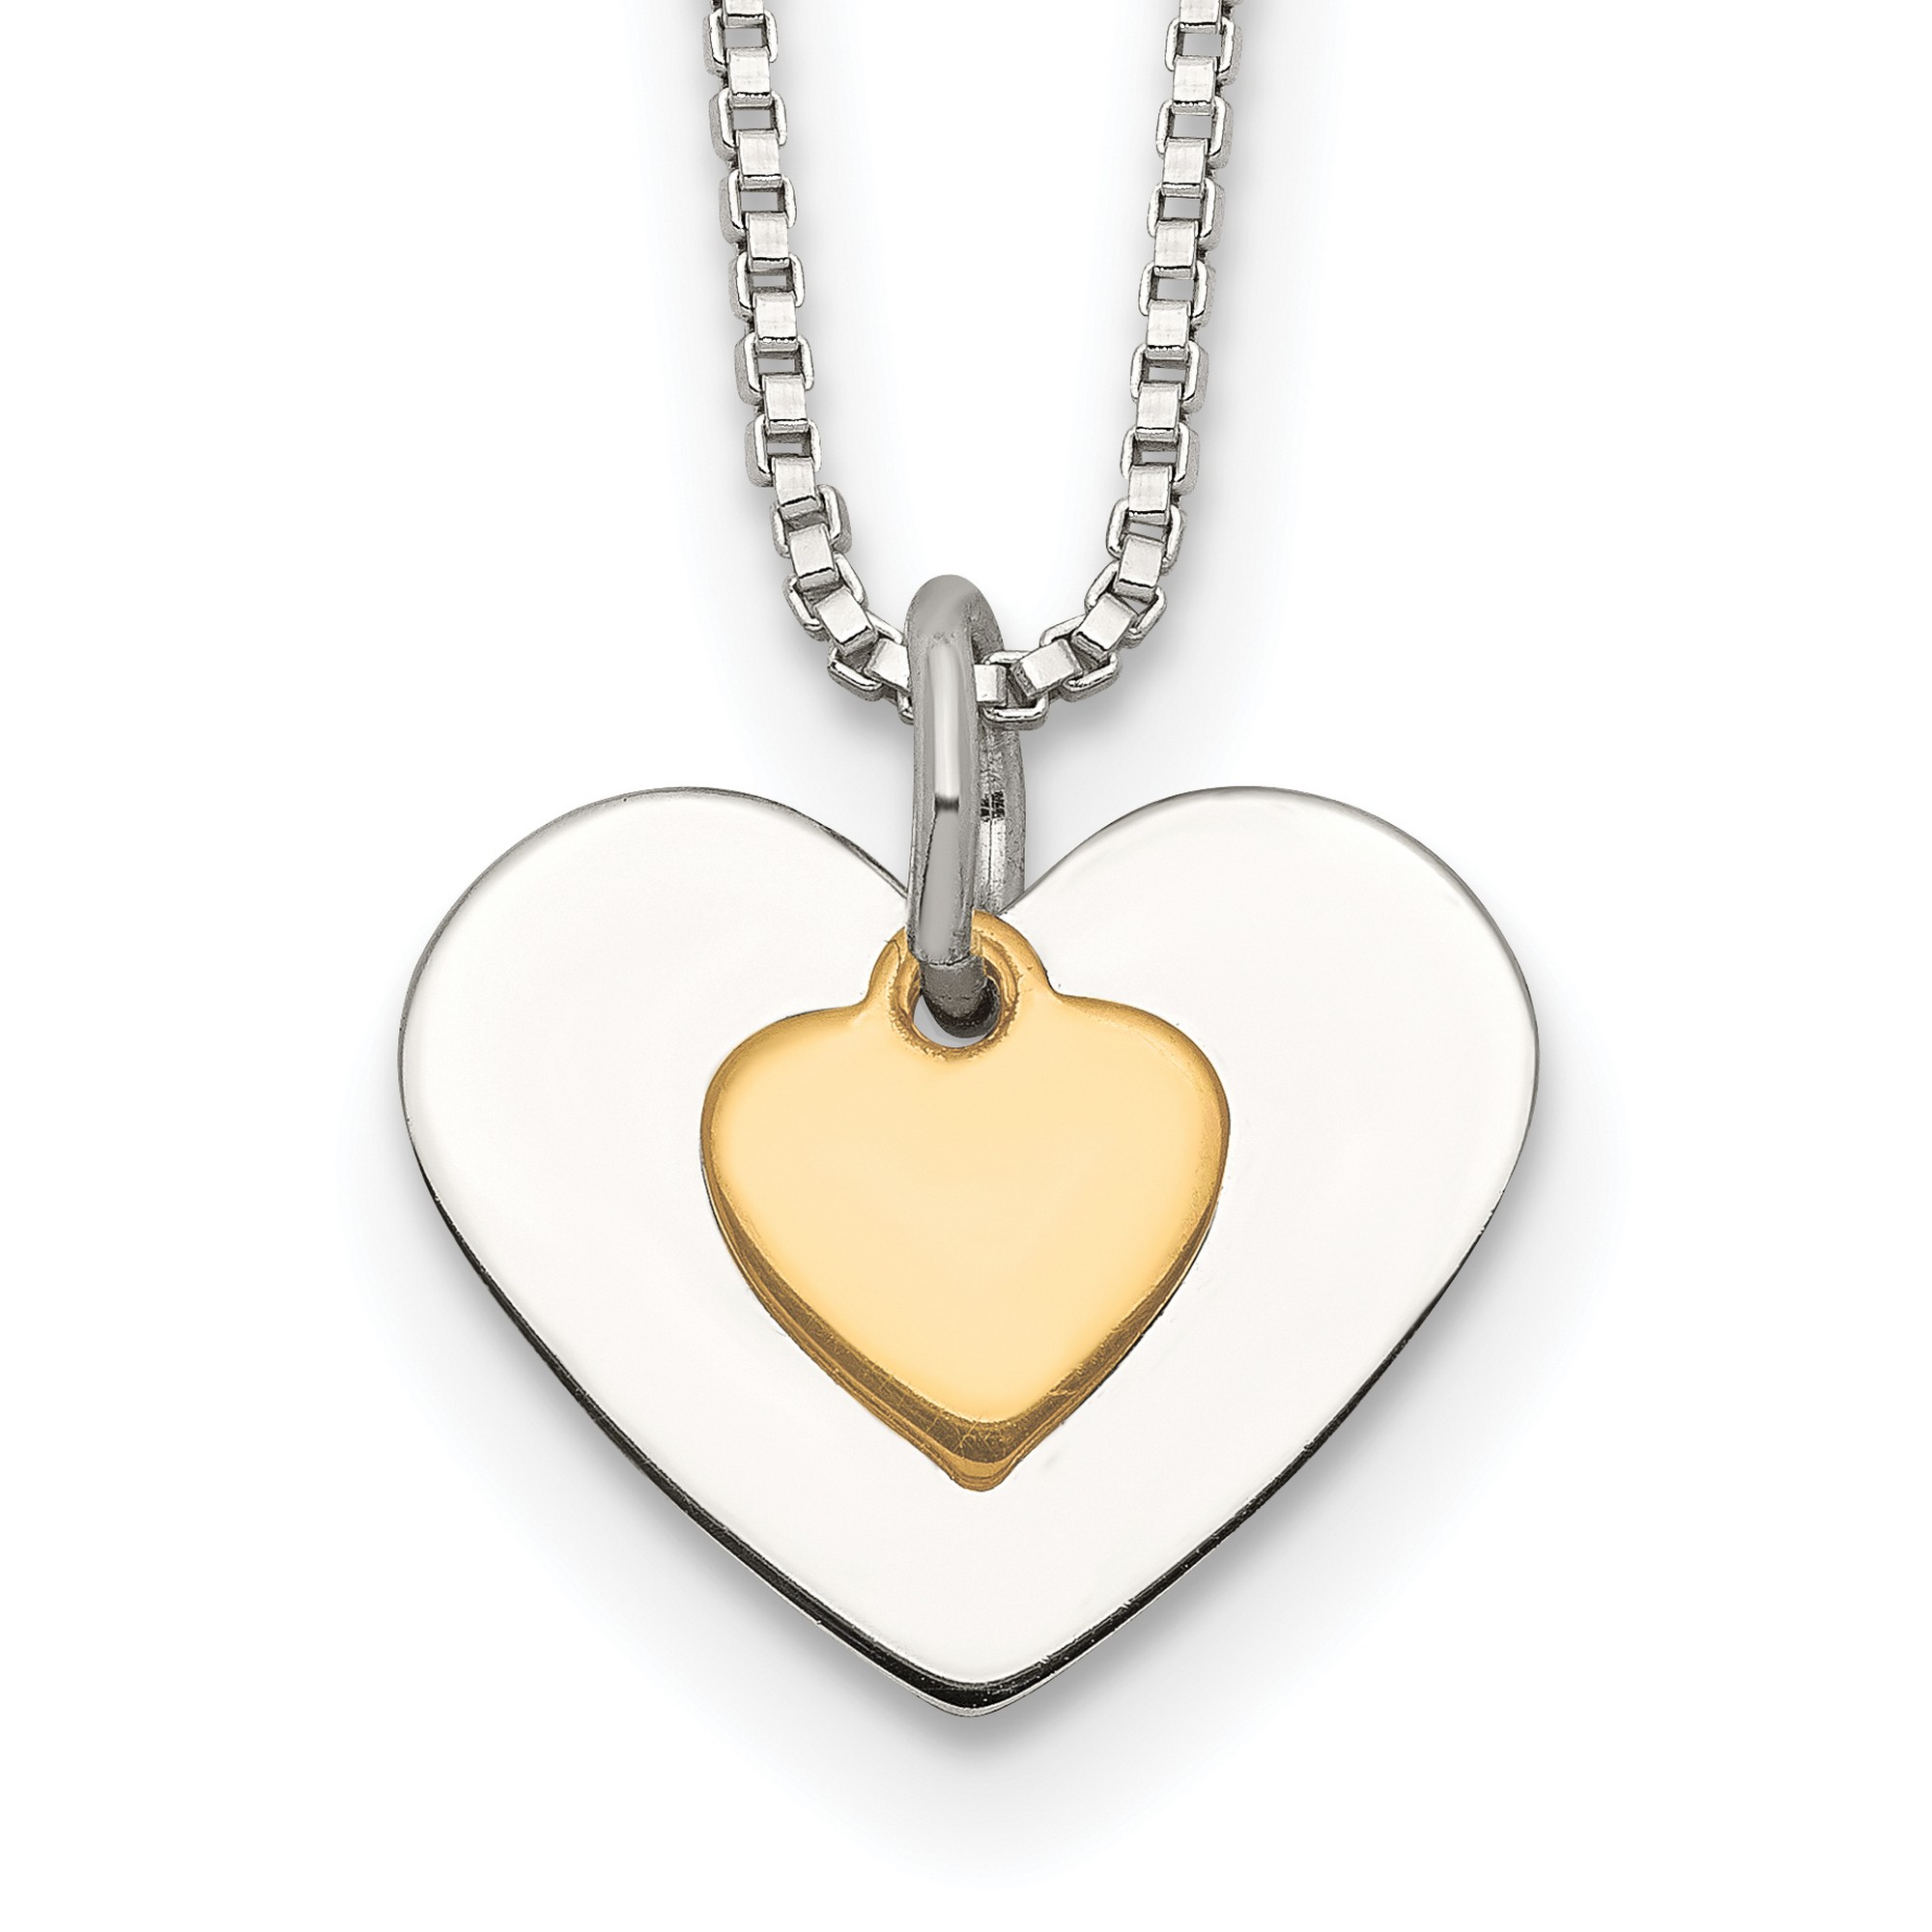 Gold Vermeil Fancy Heart Necklace In 925 Sterling Silver 14x14mm 18 Inches 